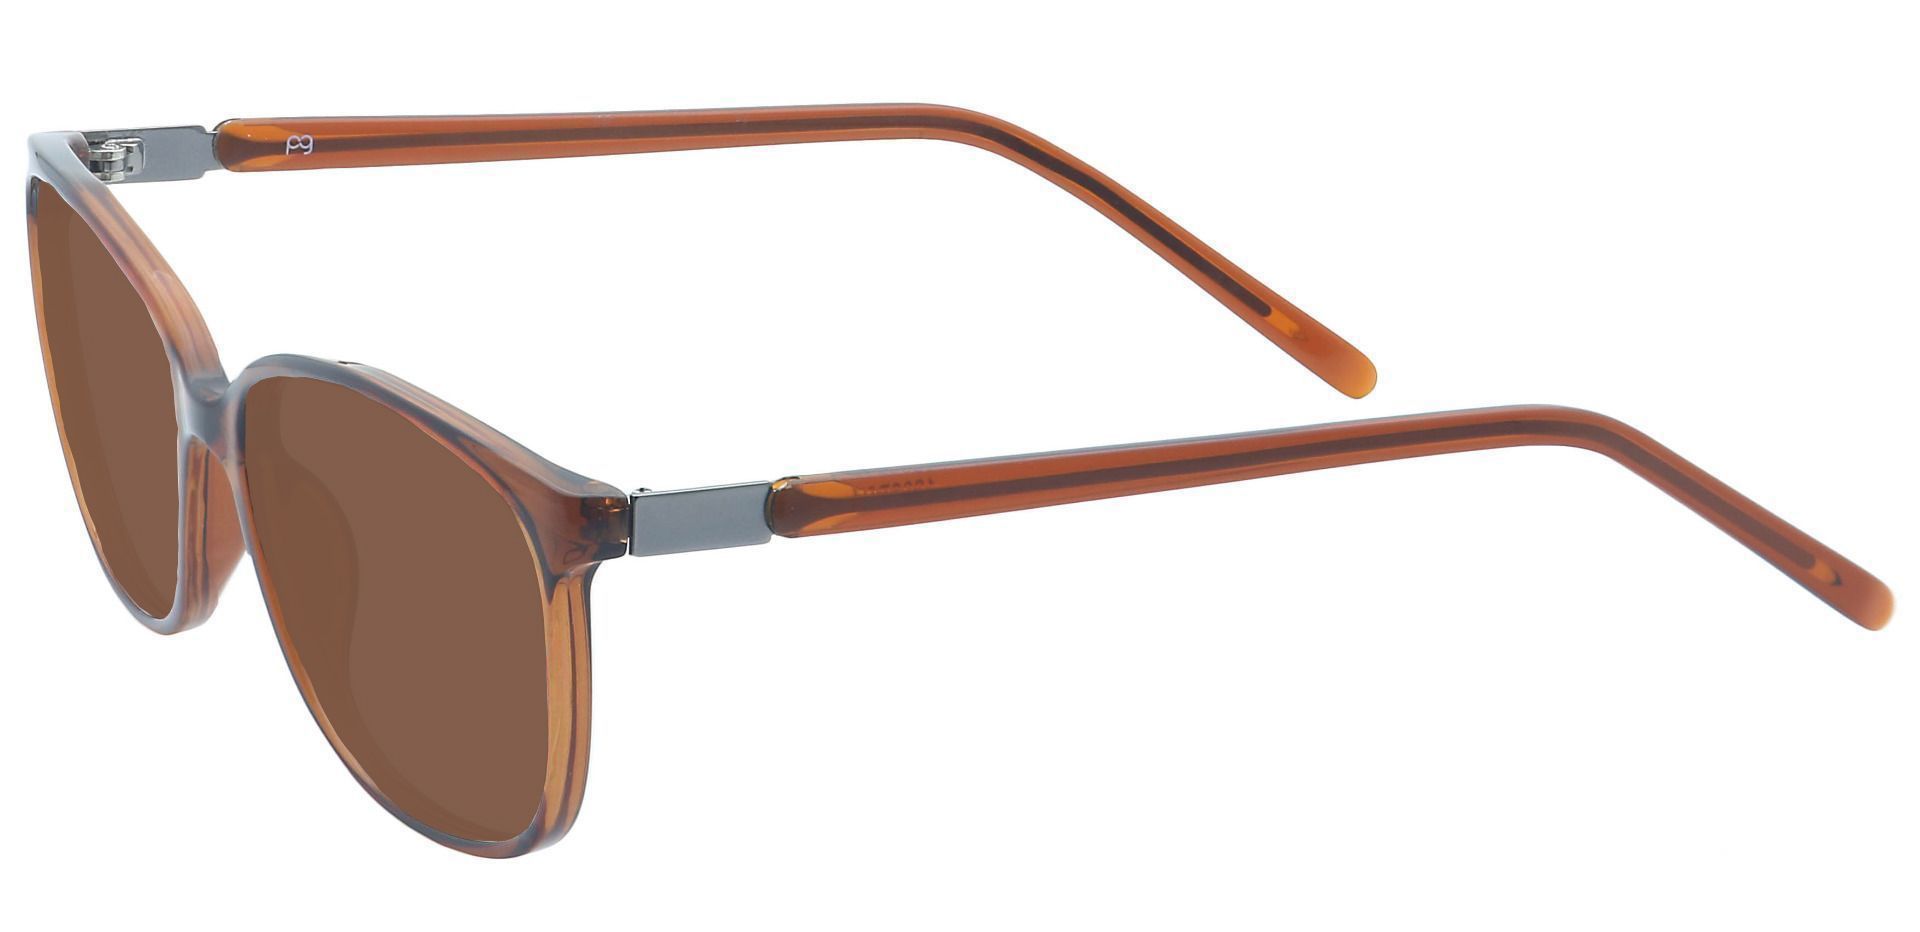 Archie Square Non-Rx Sunglasses - Brown Frame With Brown Lenses